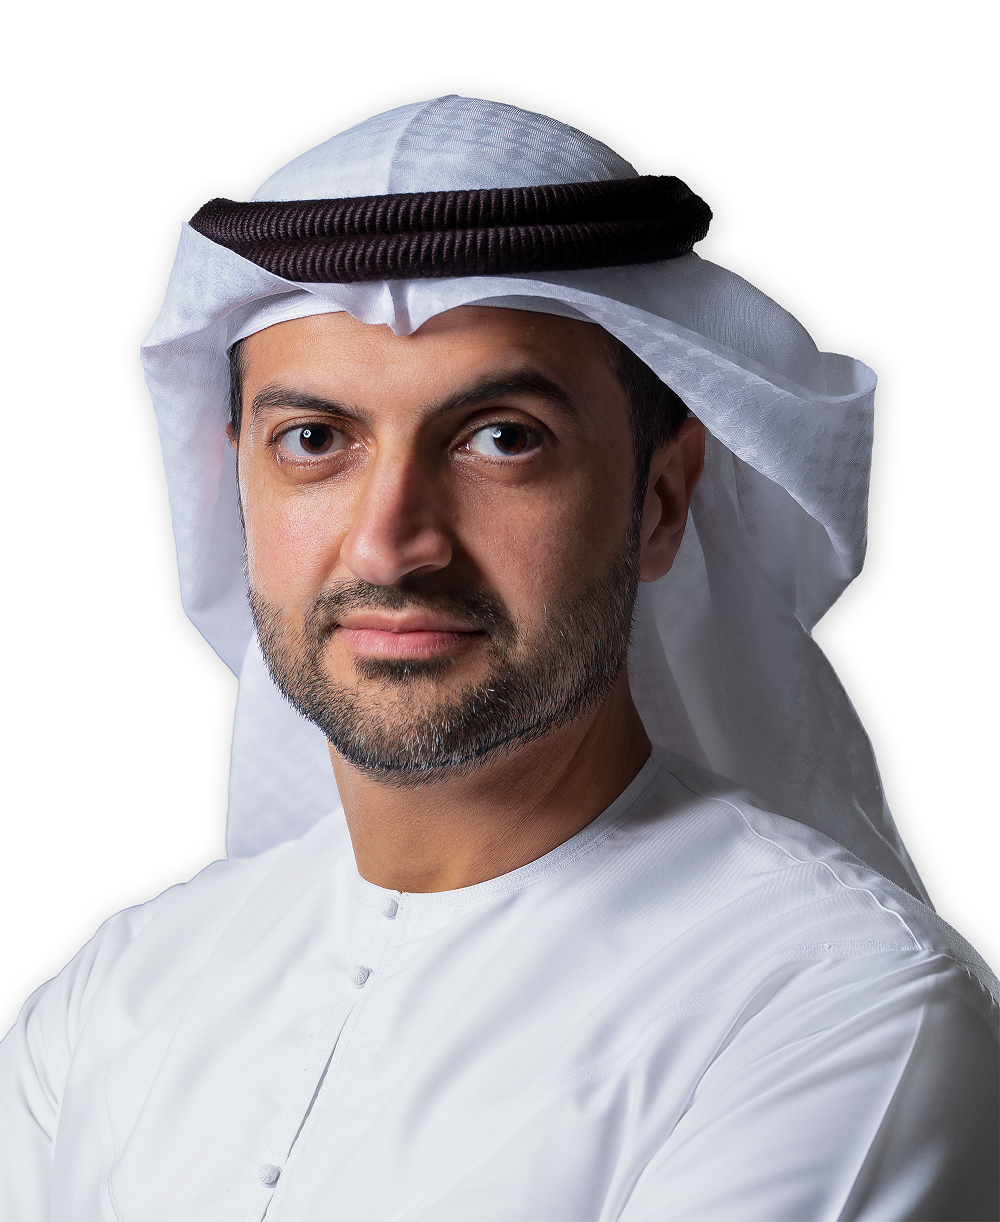 Eshraq Investments reports its highest ever quarterly profit in its history of AED 474 million for Q3 2022